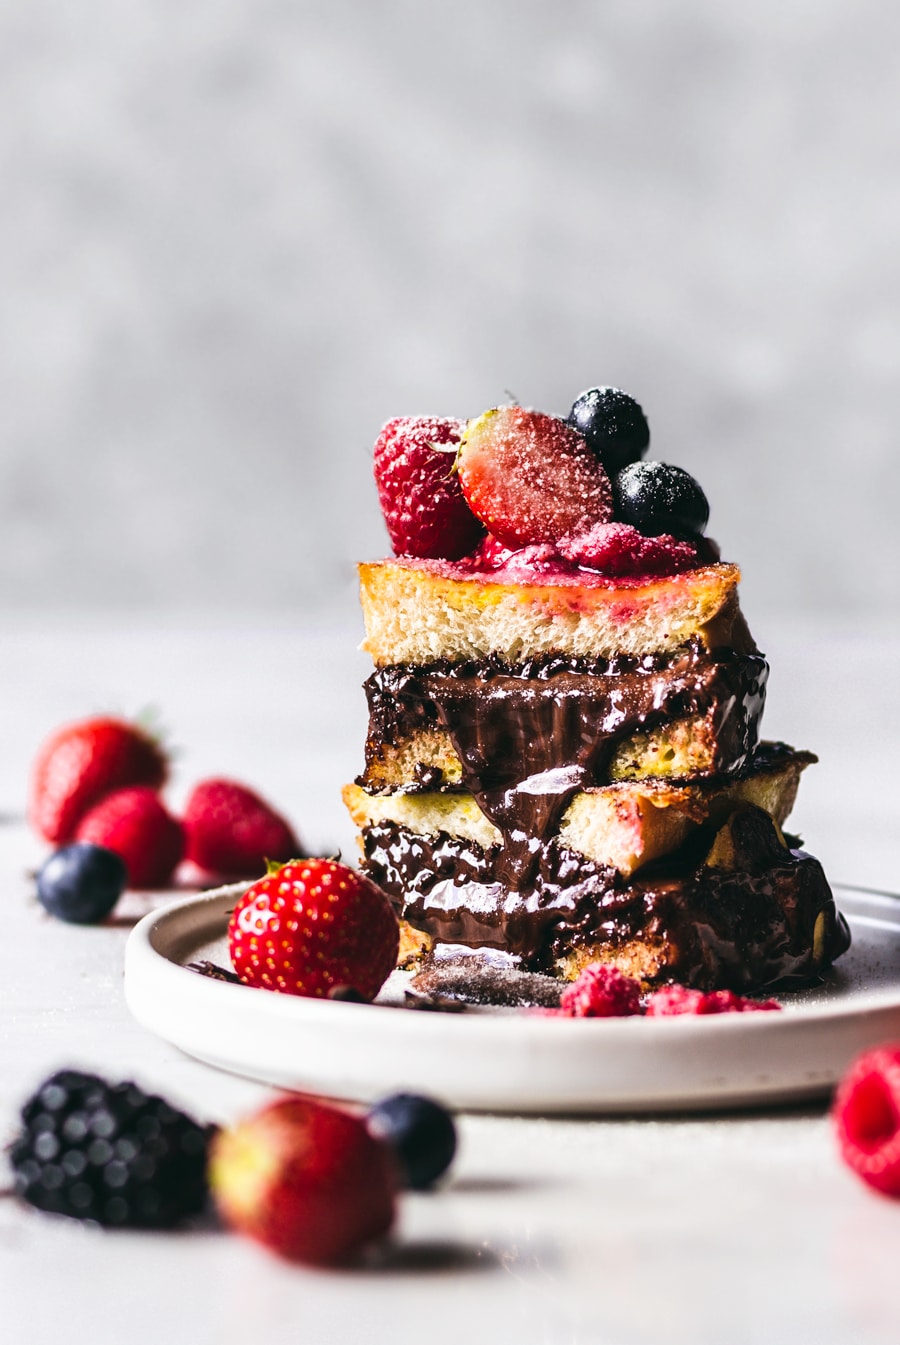 Nutella & Dark Chocolate Stuffed French Toast stacked high on a white plate with the decadent chocolate filling oozing out.